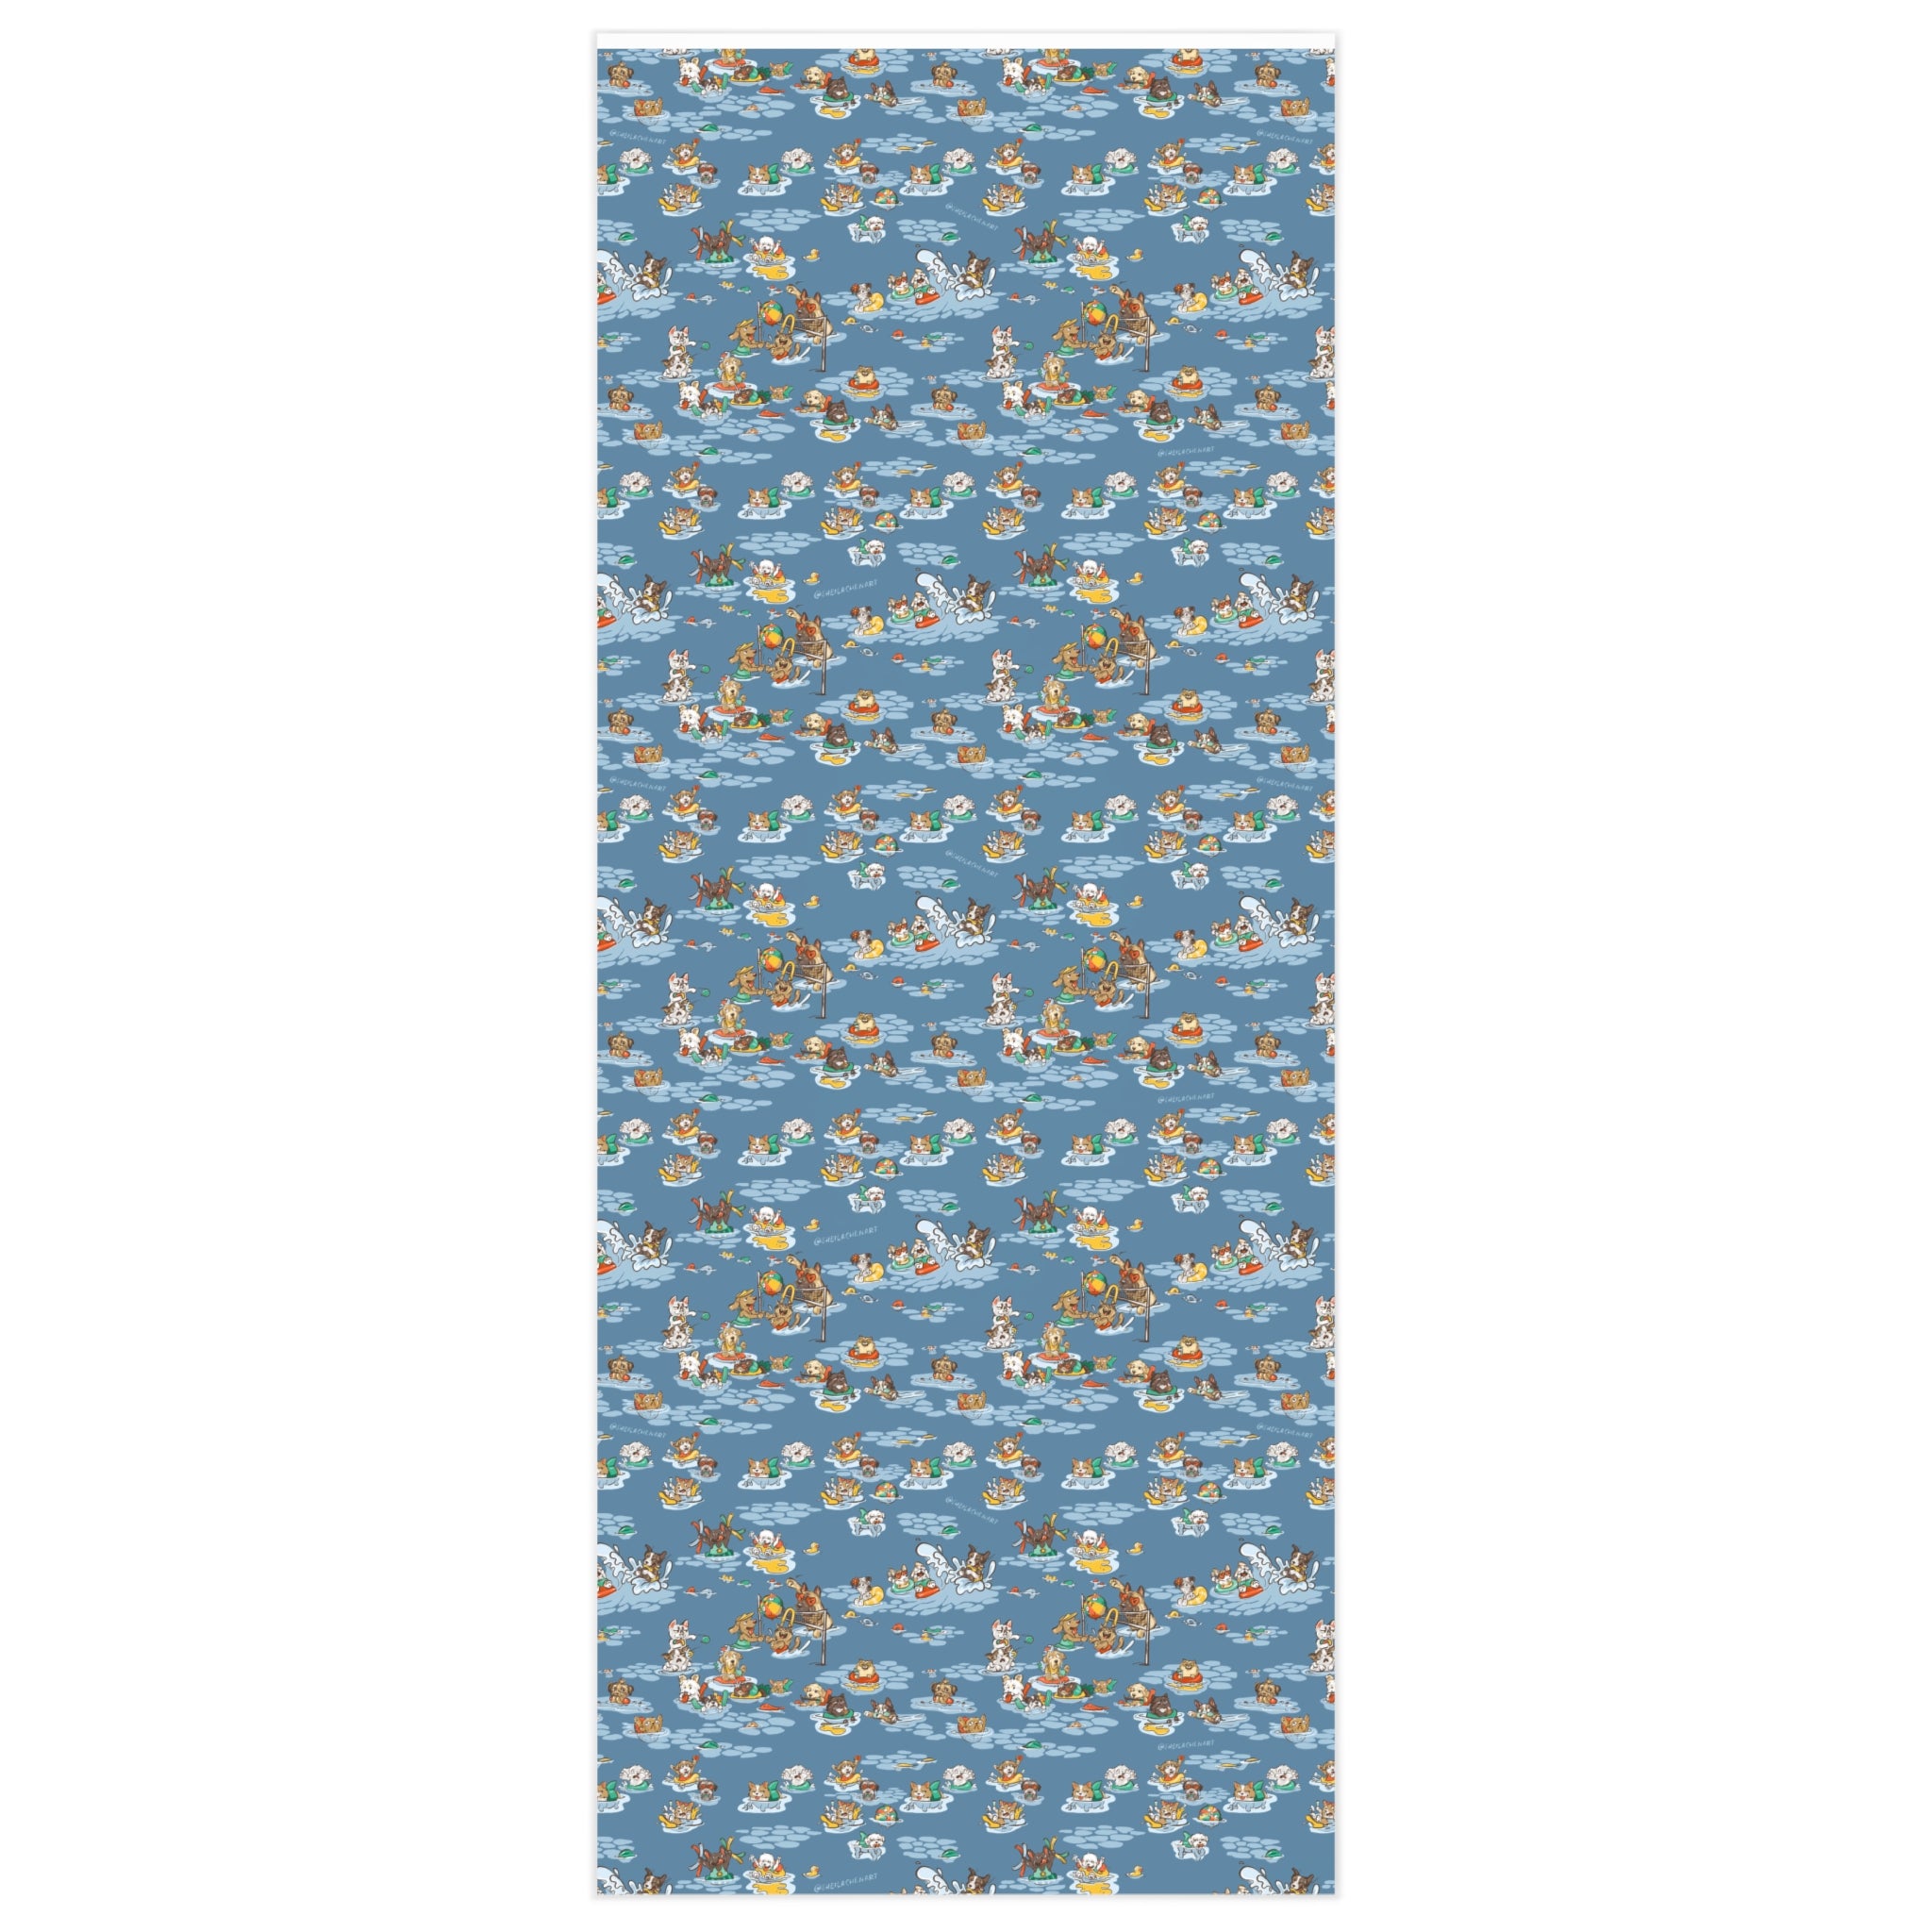 Wrapping Paper - Pool Party Blue